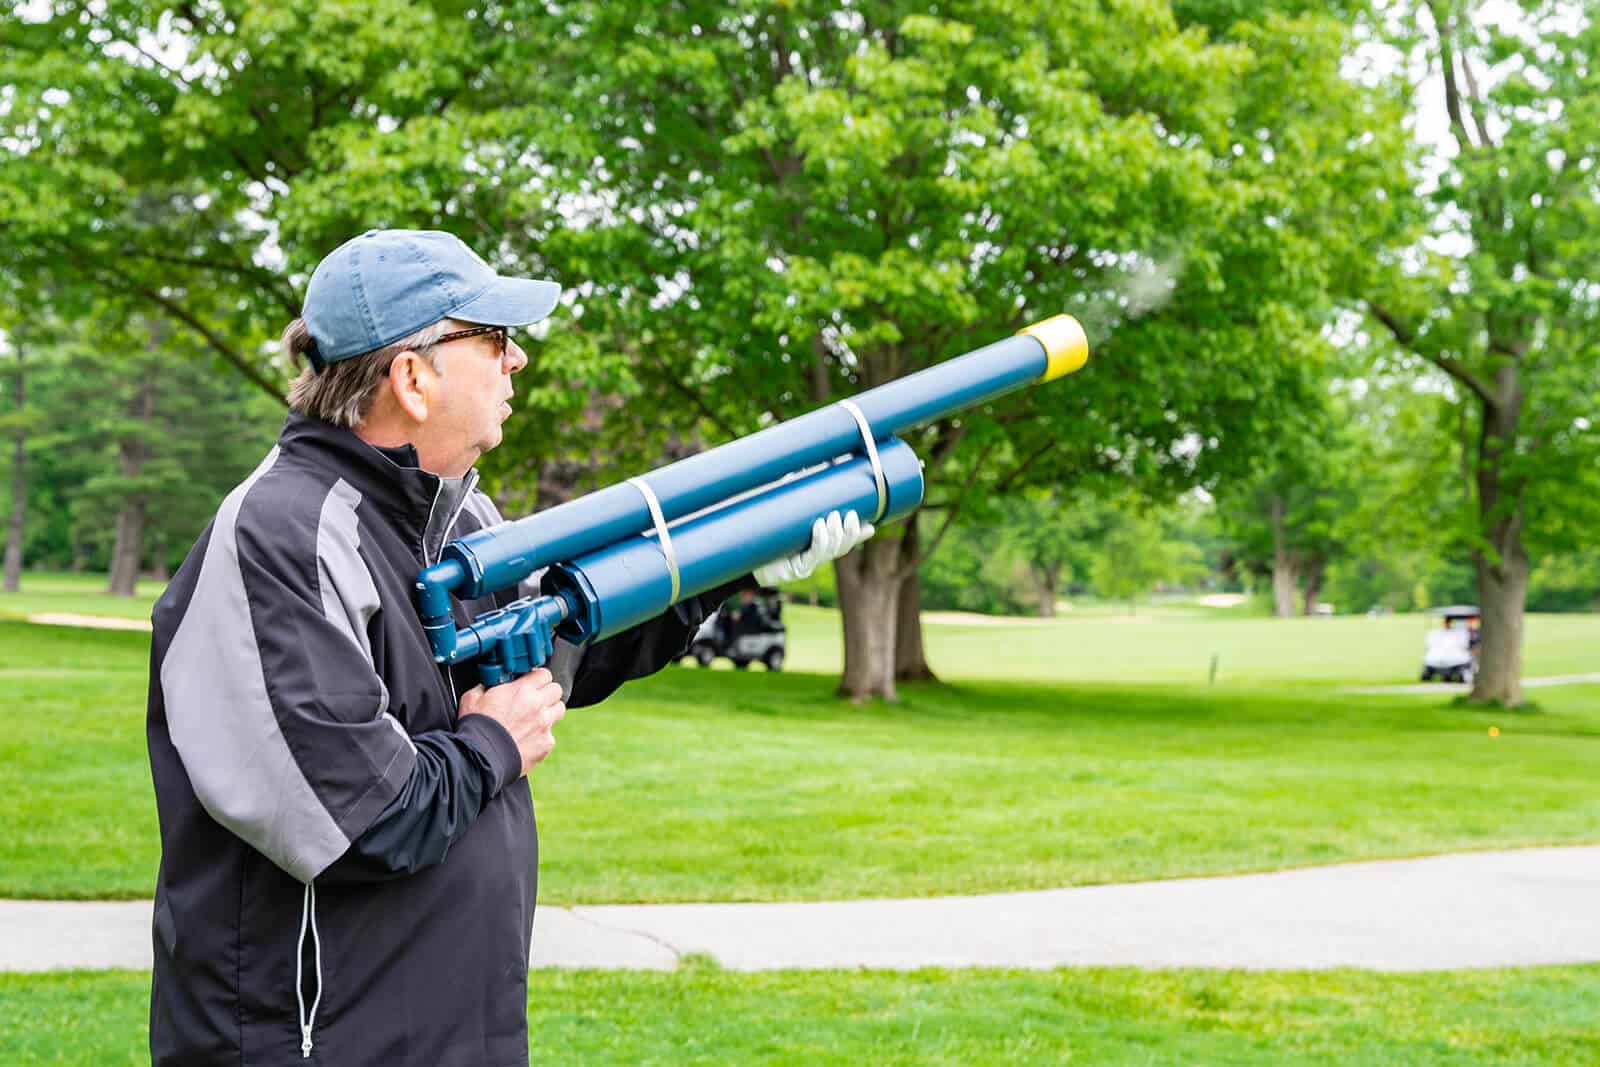 Player holding cannon launch equipment